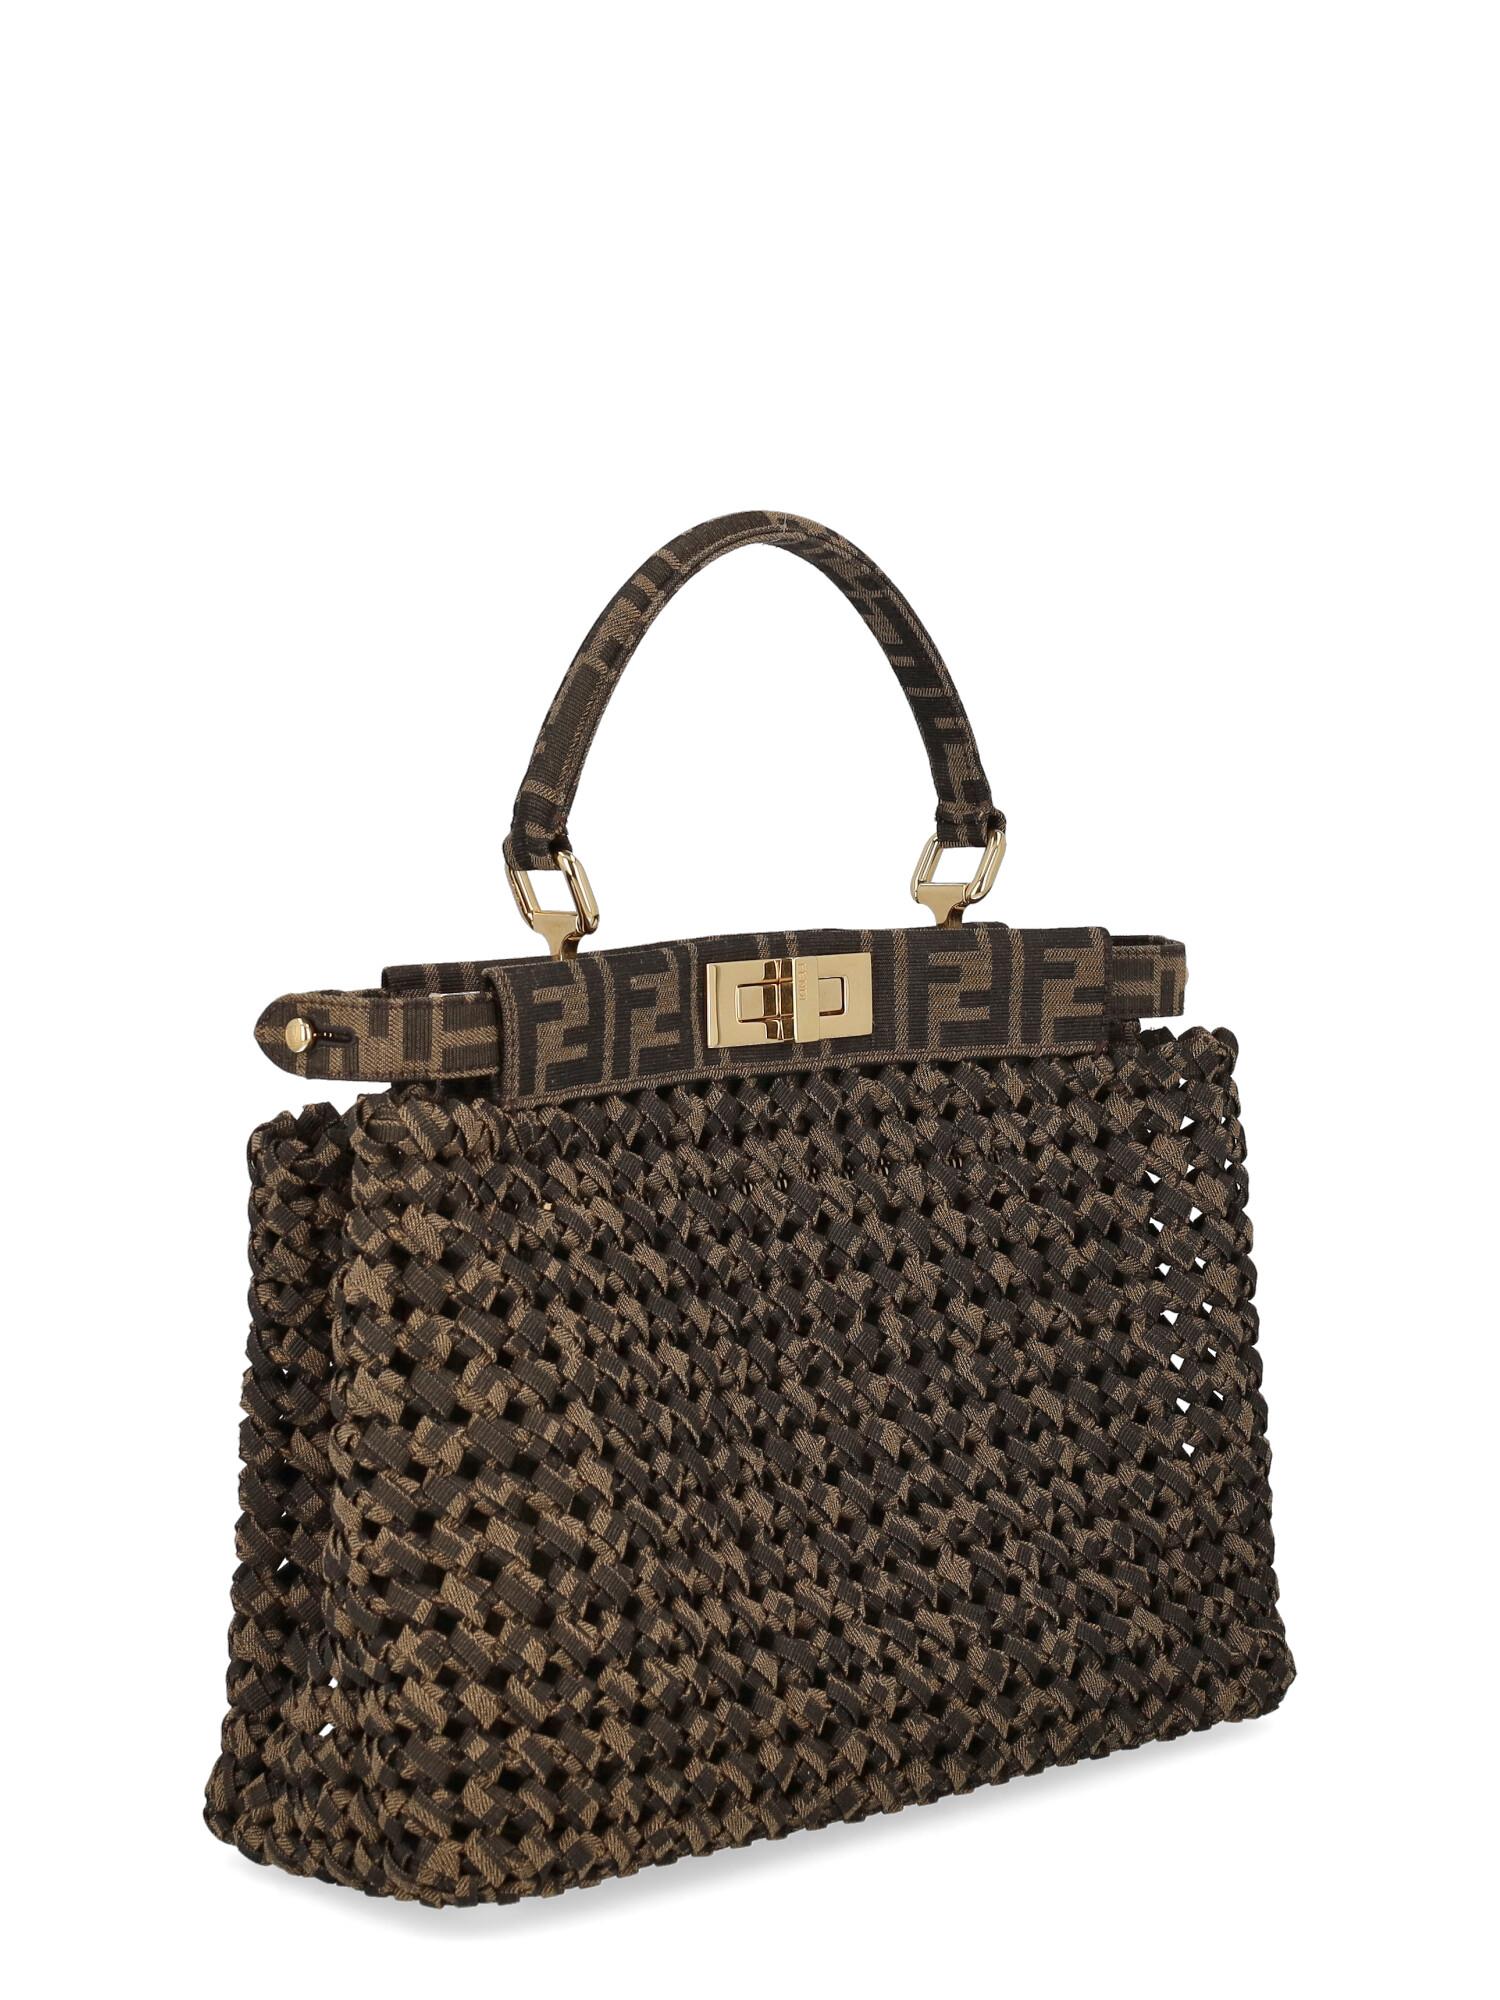 Product Description: Peekaboo is the quintessential Fendi handbag, its timeless design speaks to your soul. Immediately recognizable for its unique closure, Peekaboo features two internal compartments divided by a stiff central partition and truly